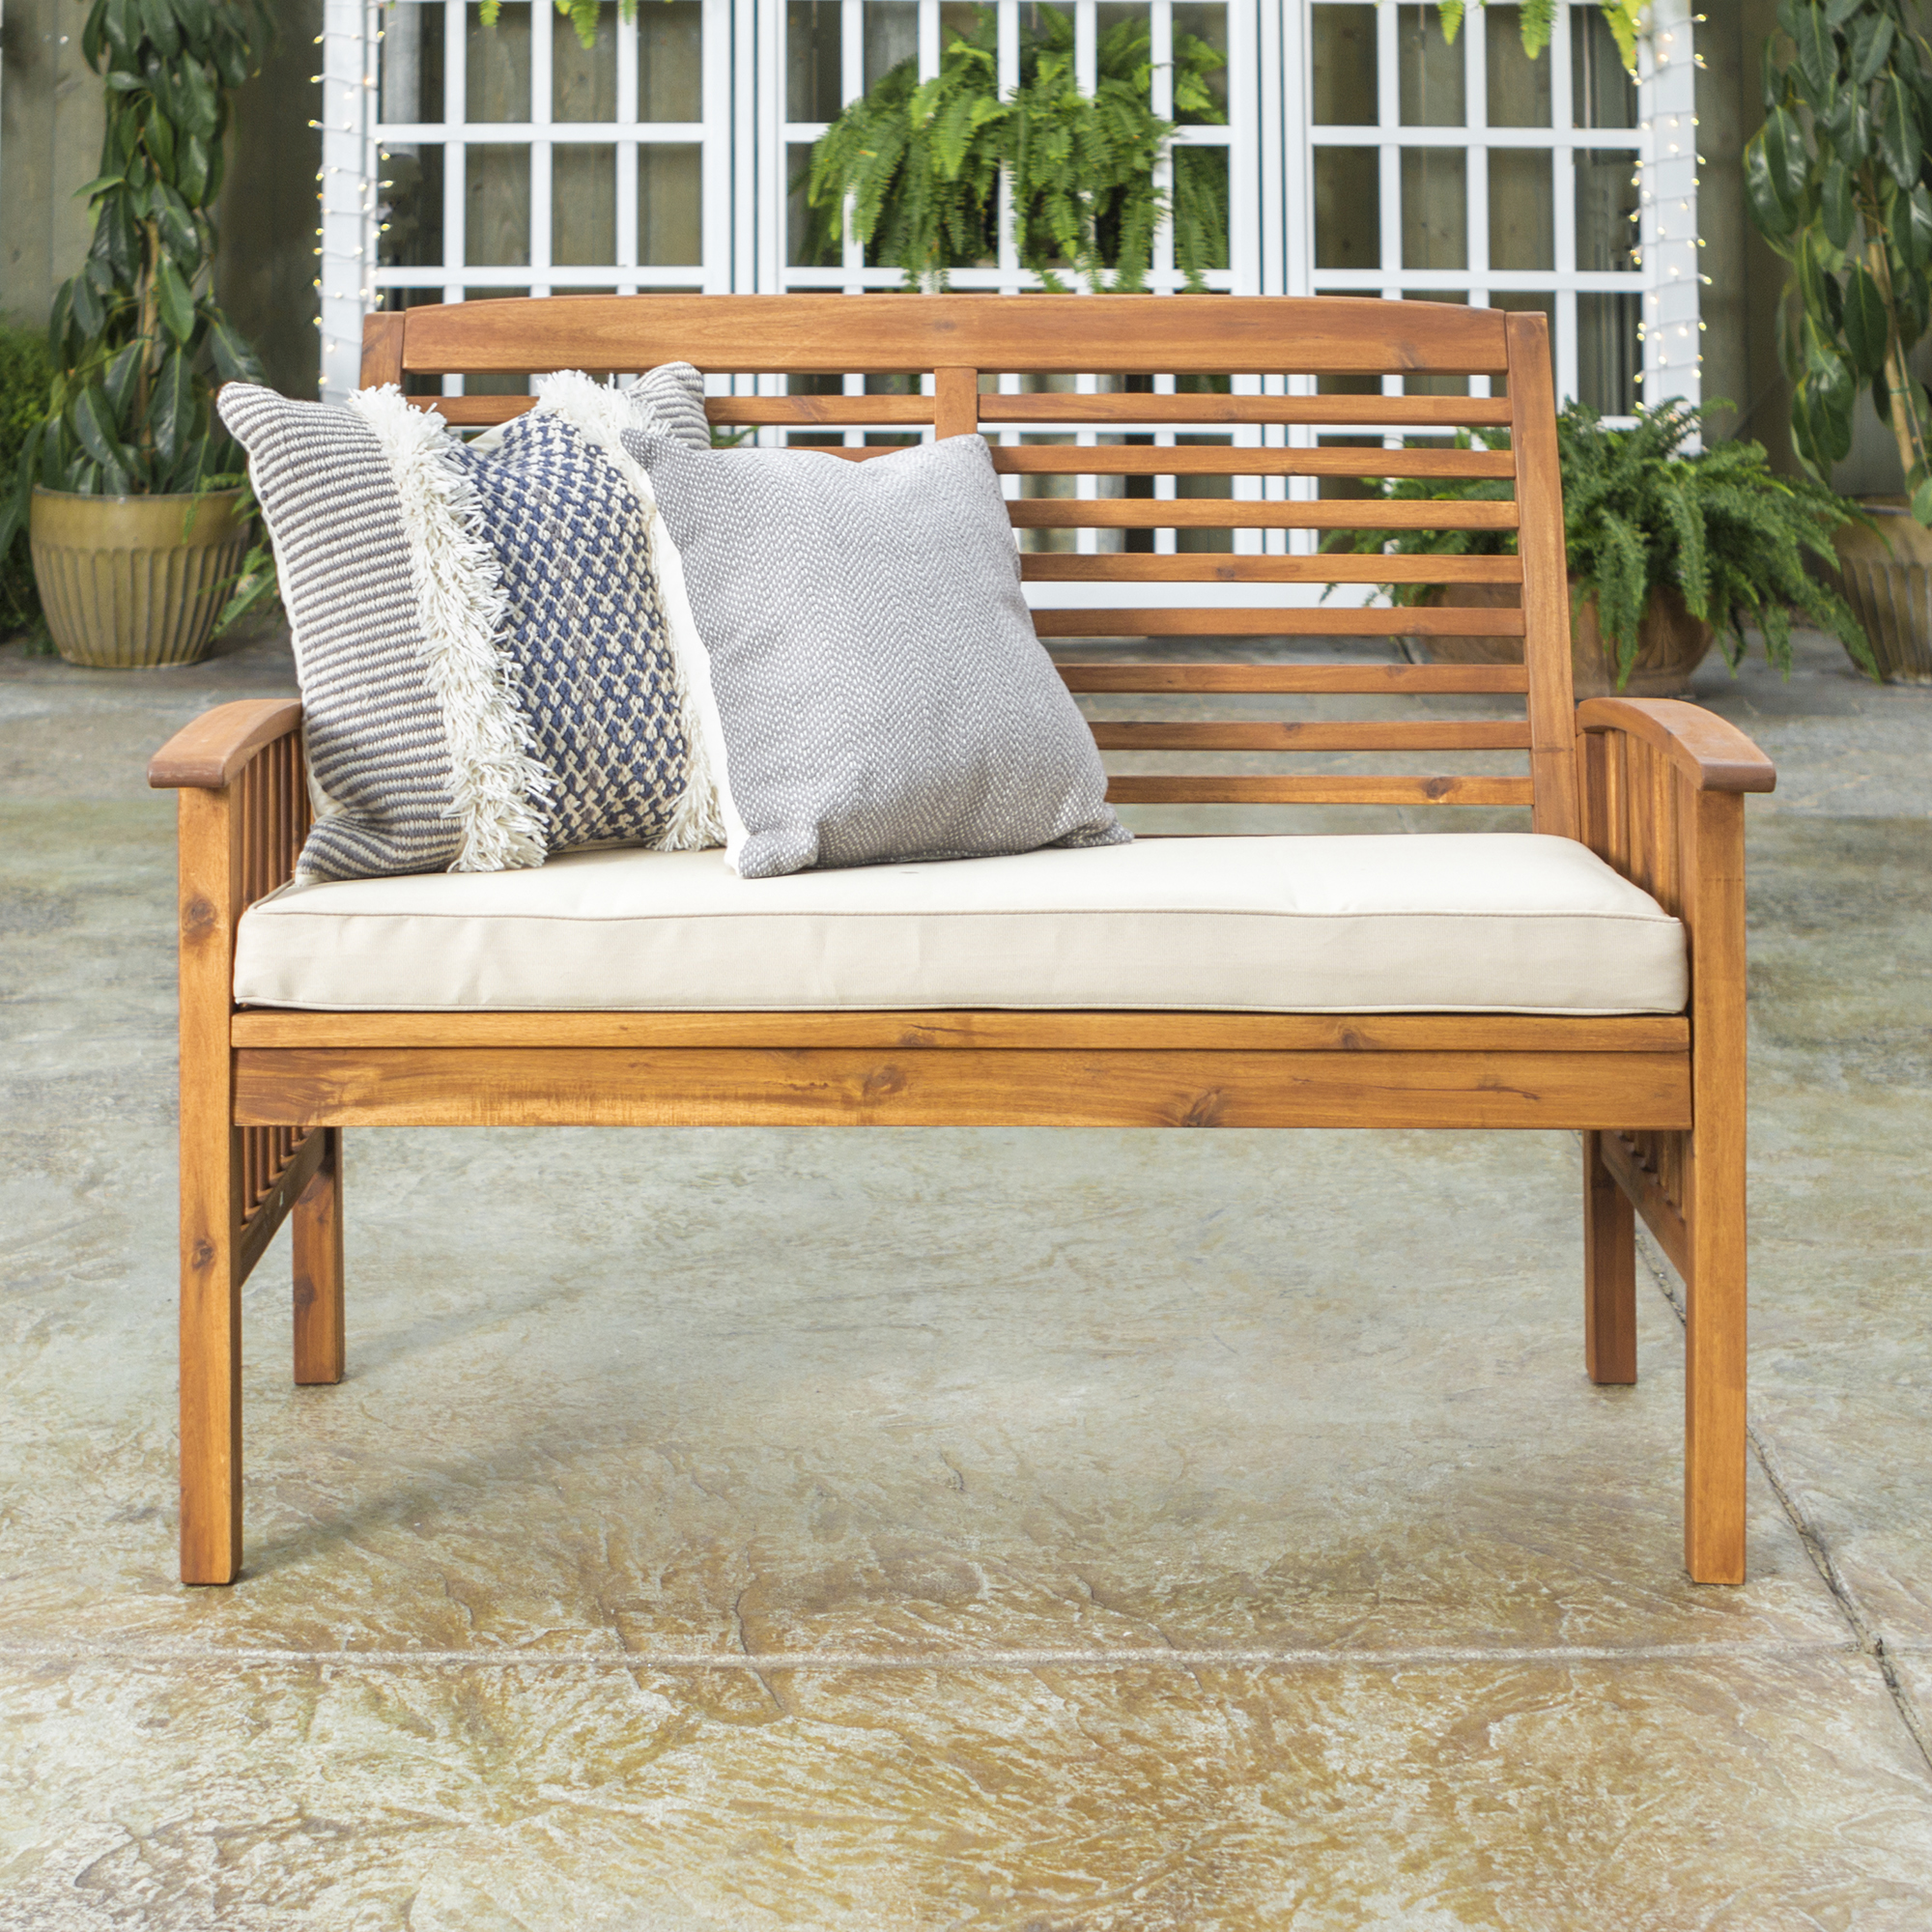 Walker Edison 48" Outdoor Patio Wood Loveseat With Cushions - Brown - image 3 of 8